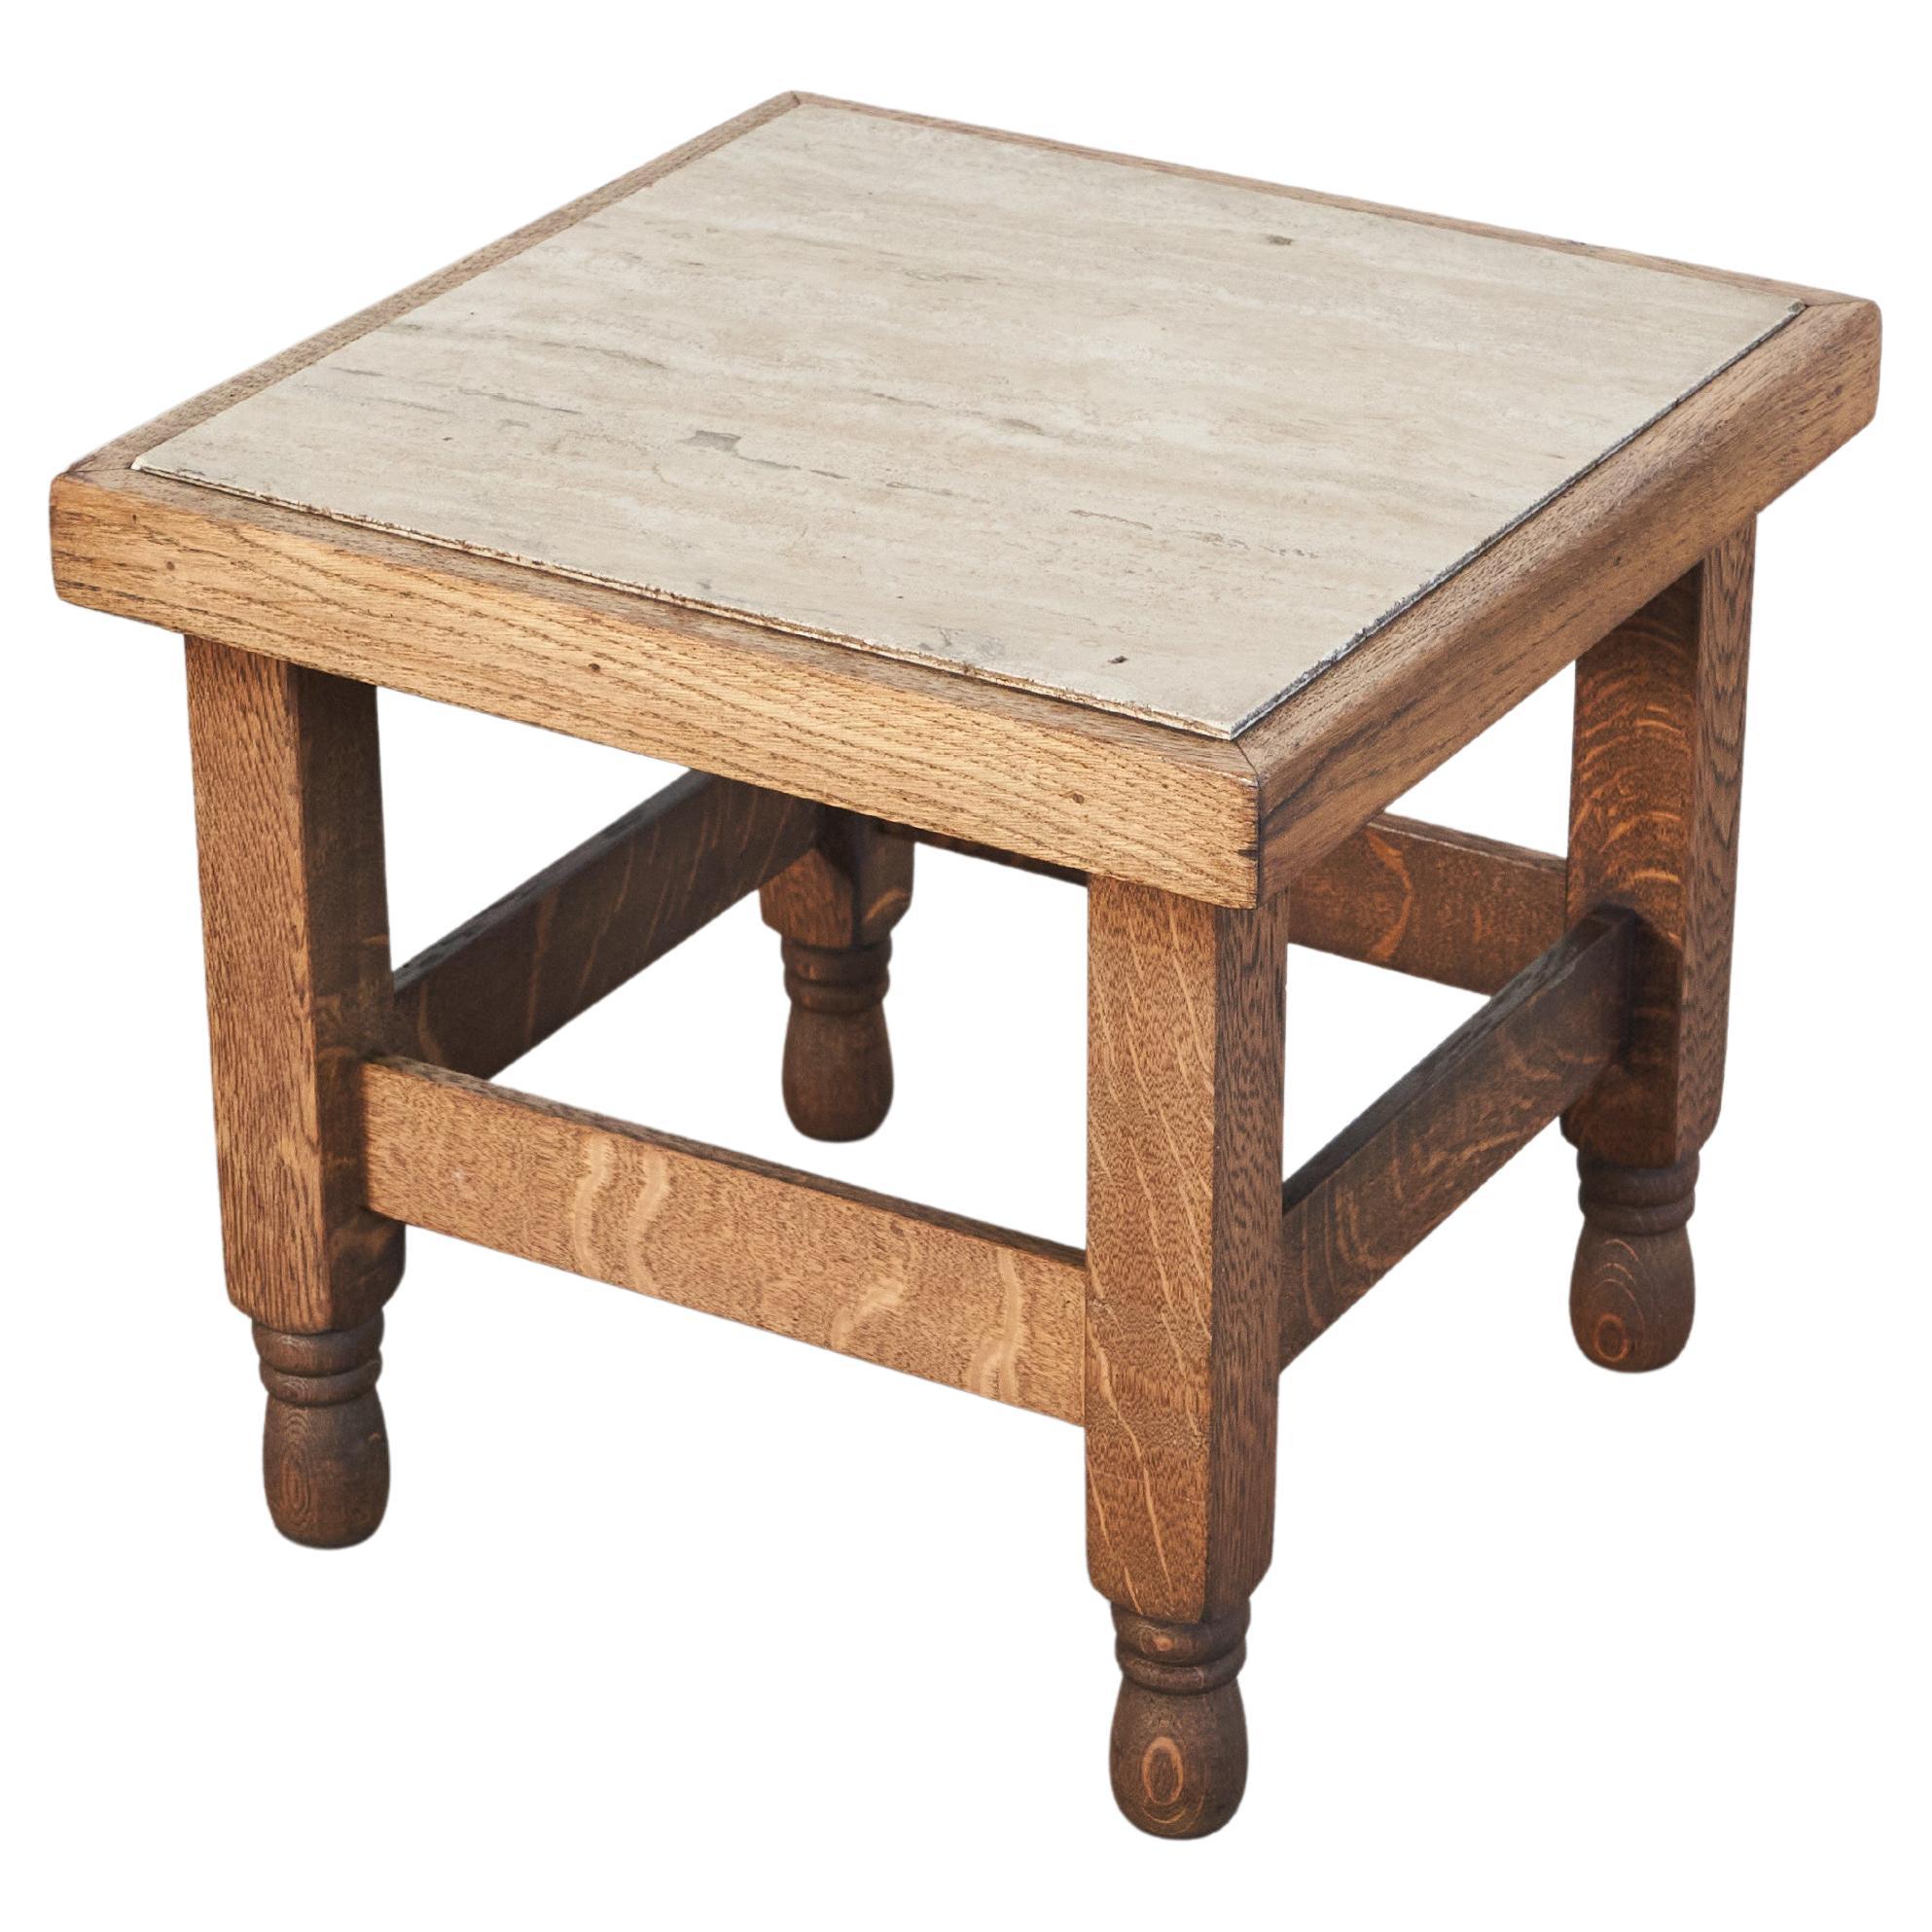 Art Deco Side Table in Solid Oak and Travertine 1930s